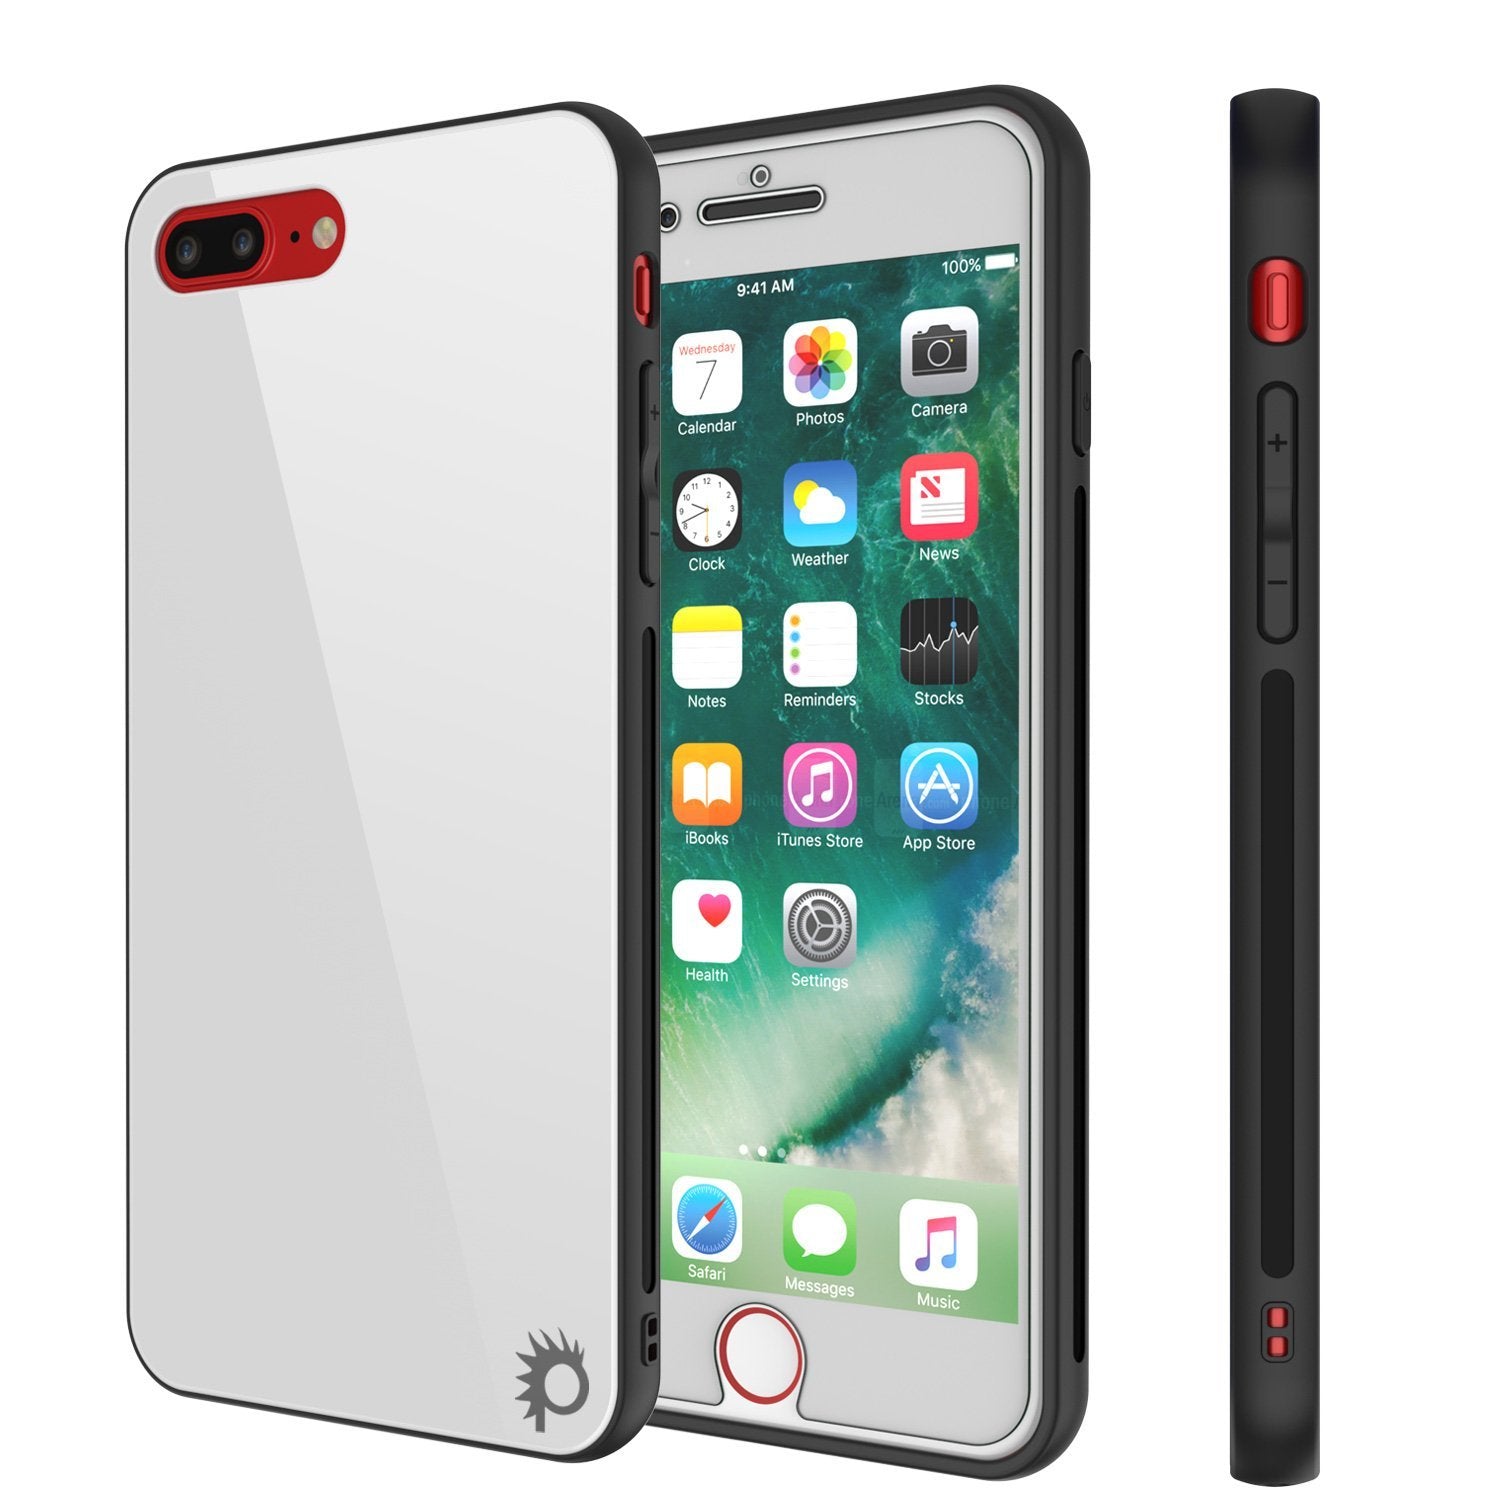 iPhone 8 PLUS Case, Punkcase GlassShield Ultra Thin Protective 9H Full Body Tempered Glass Cover W/ Drop Protection & Non Slip Grip for Apple iPhone 7 PLUS / Apple iPhone 8 PLUS (White) - PunkCase NZ